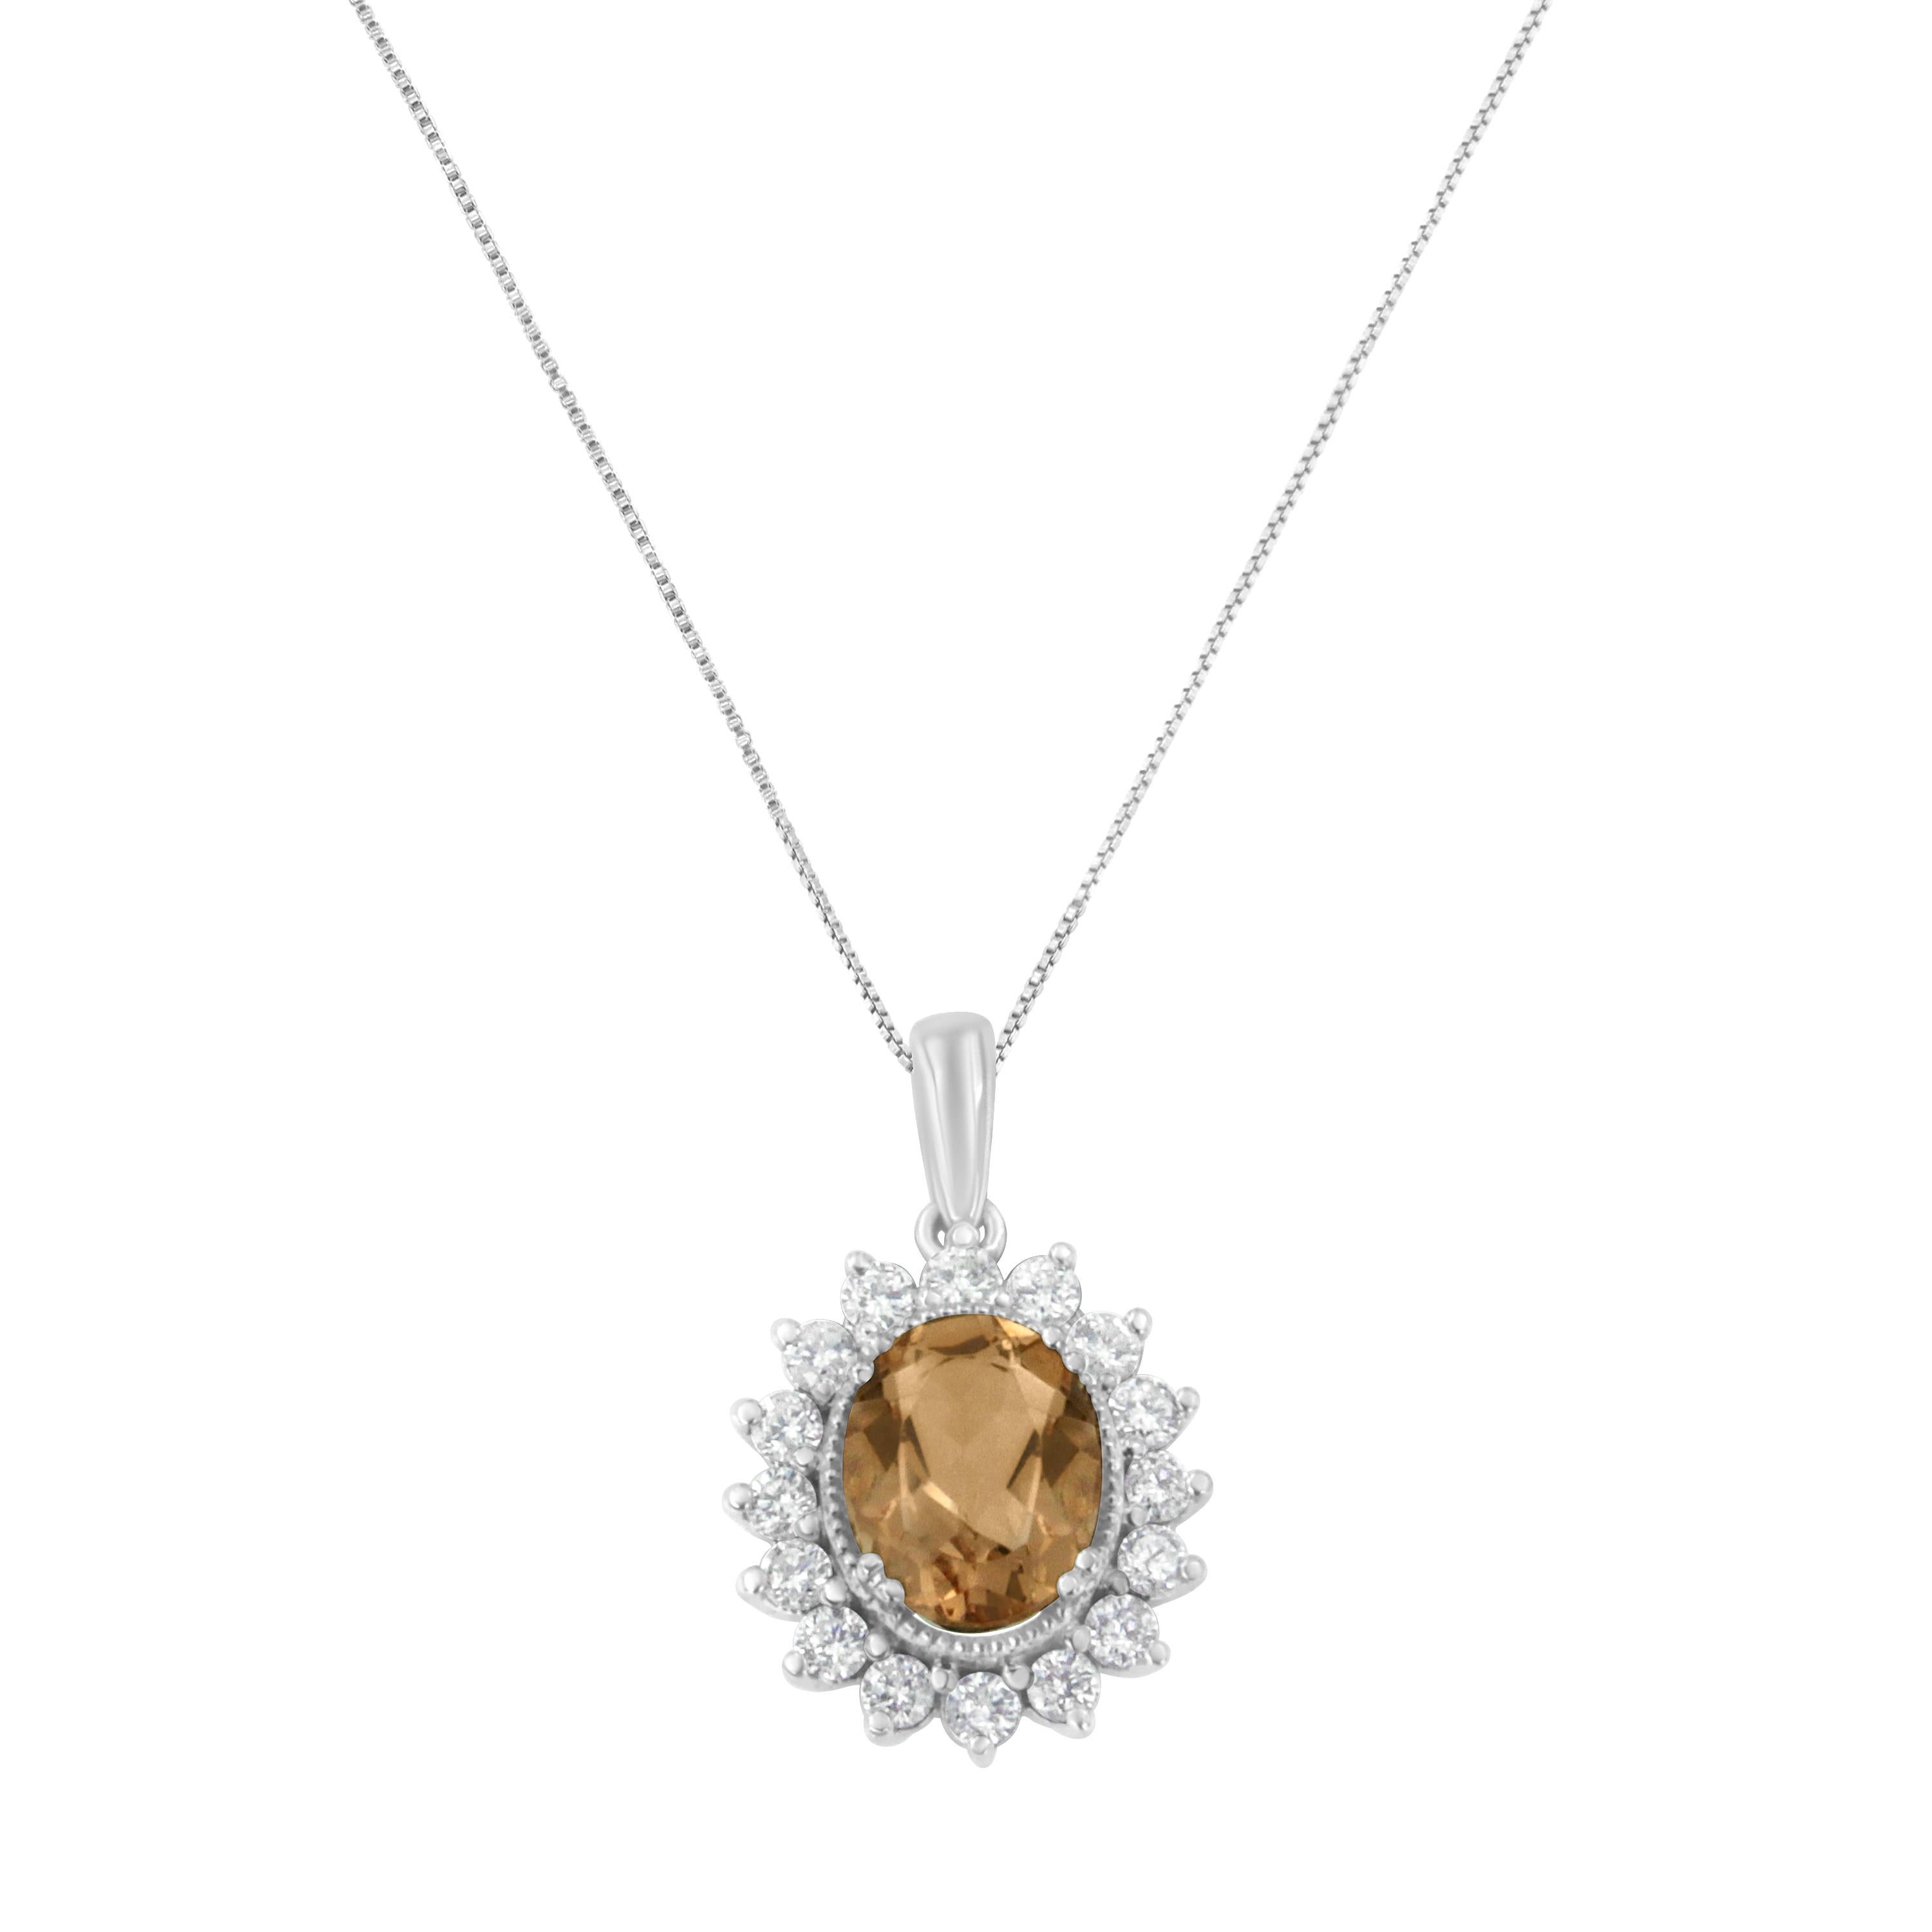 A gleaming row of 1/2ct round cut diamonds create a frame around a beautiful gemstone. A stunning 1 1/2ct oval morganite is the centerpiece for this exquisite pendant that softly dangles from a box chain.

'Video Available Upon Request.'

Product